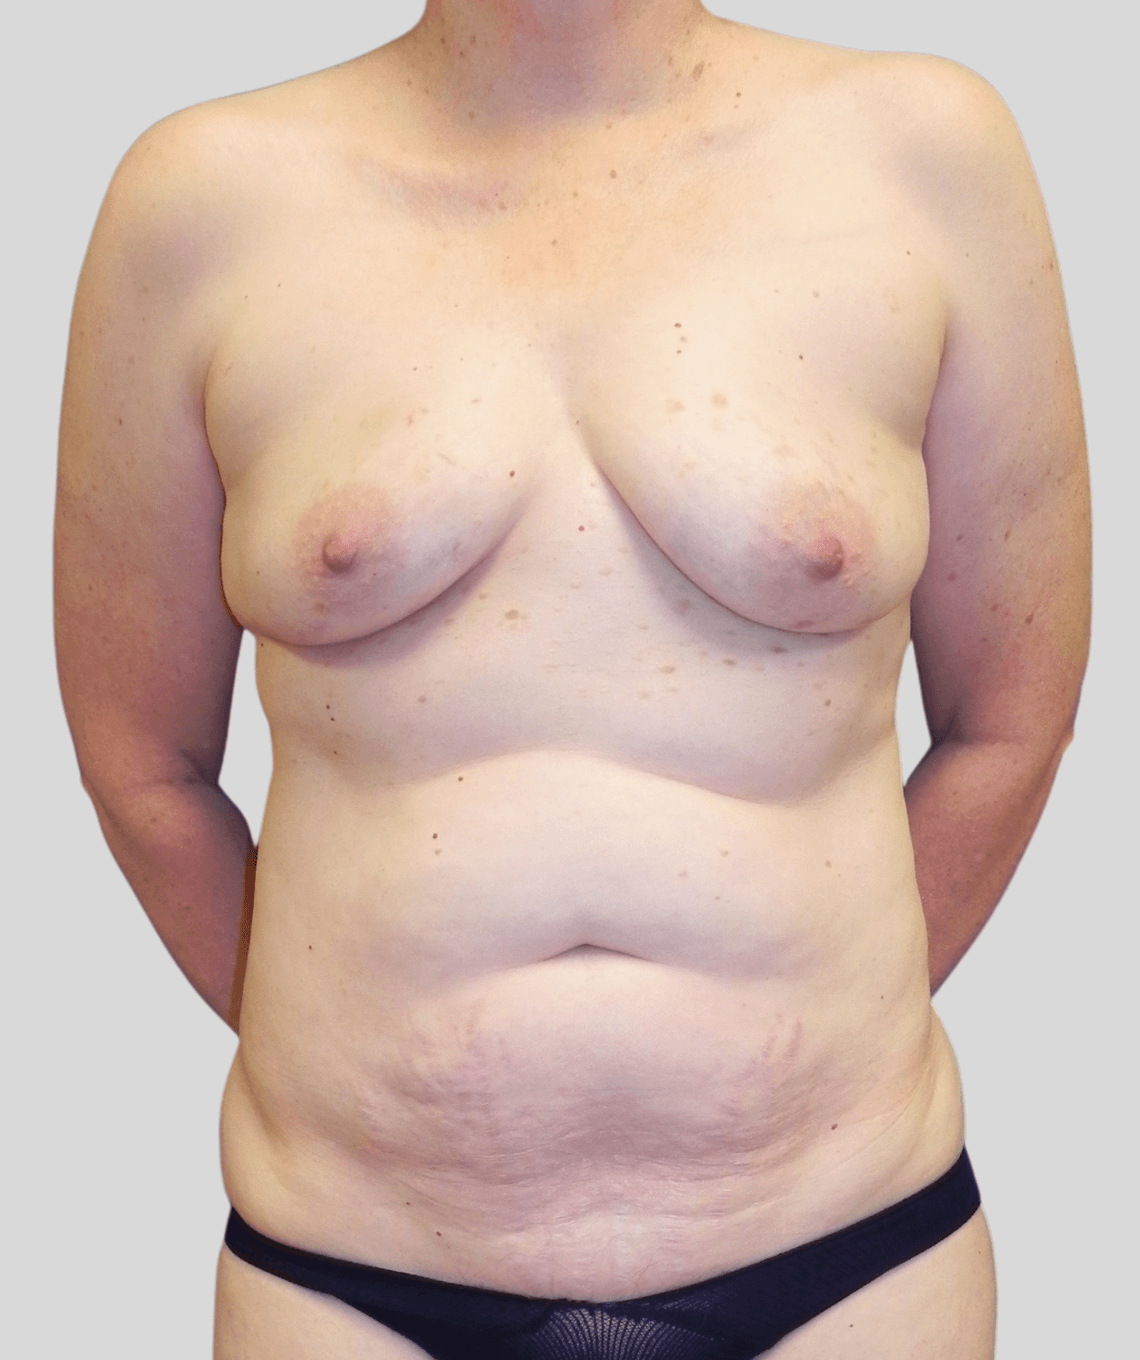 diep flap with nipple sparing mastectomy - before and after photos - prma plastic surgery - case 10